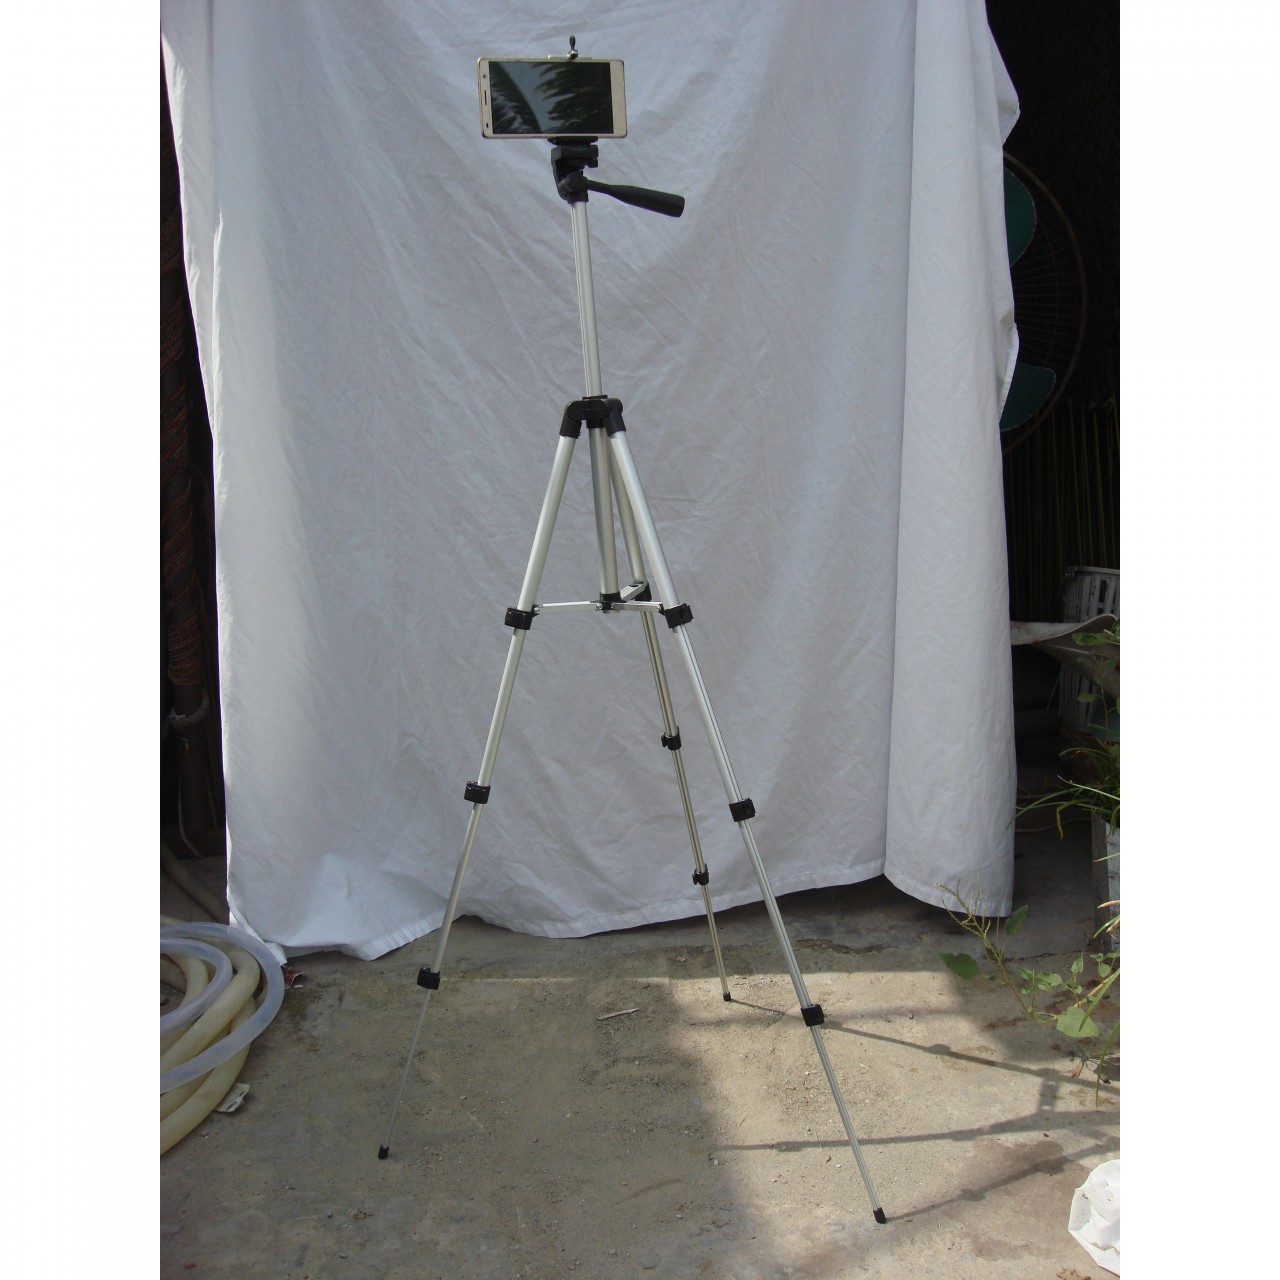 3110 Tripod stand for mobile and camera both